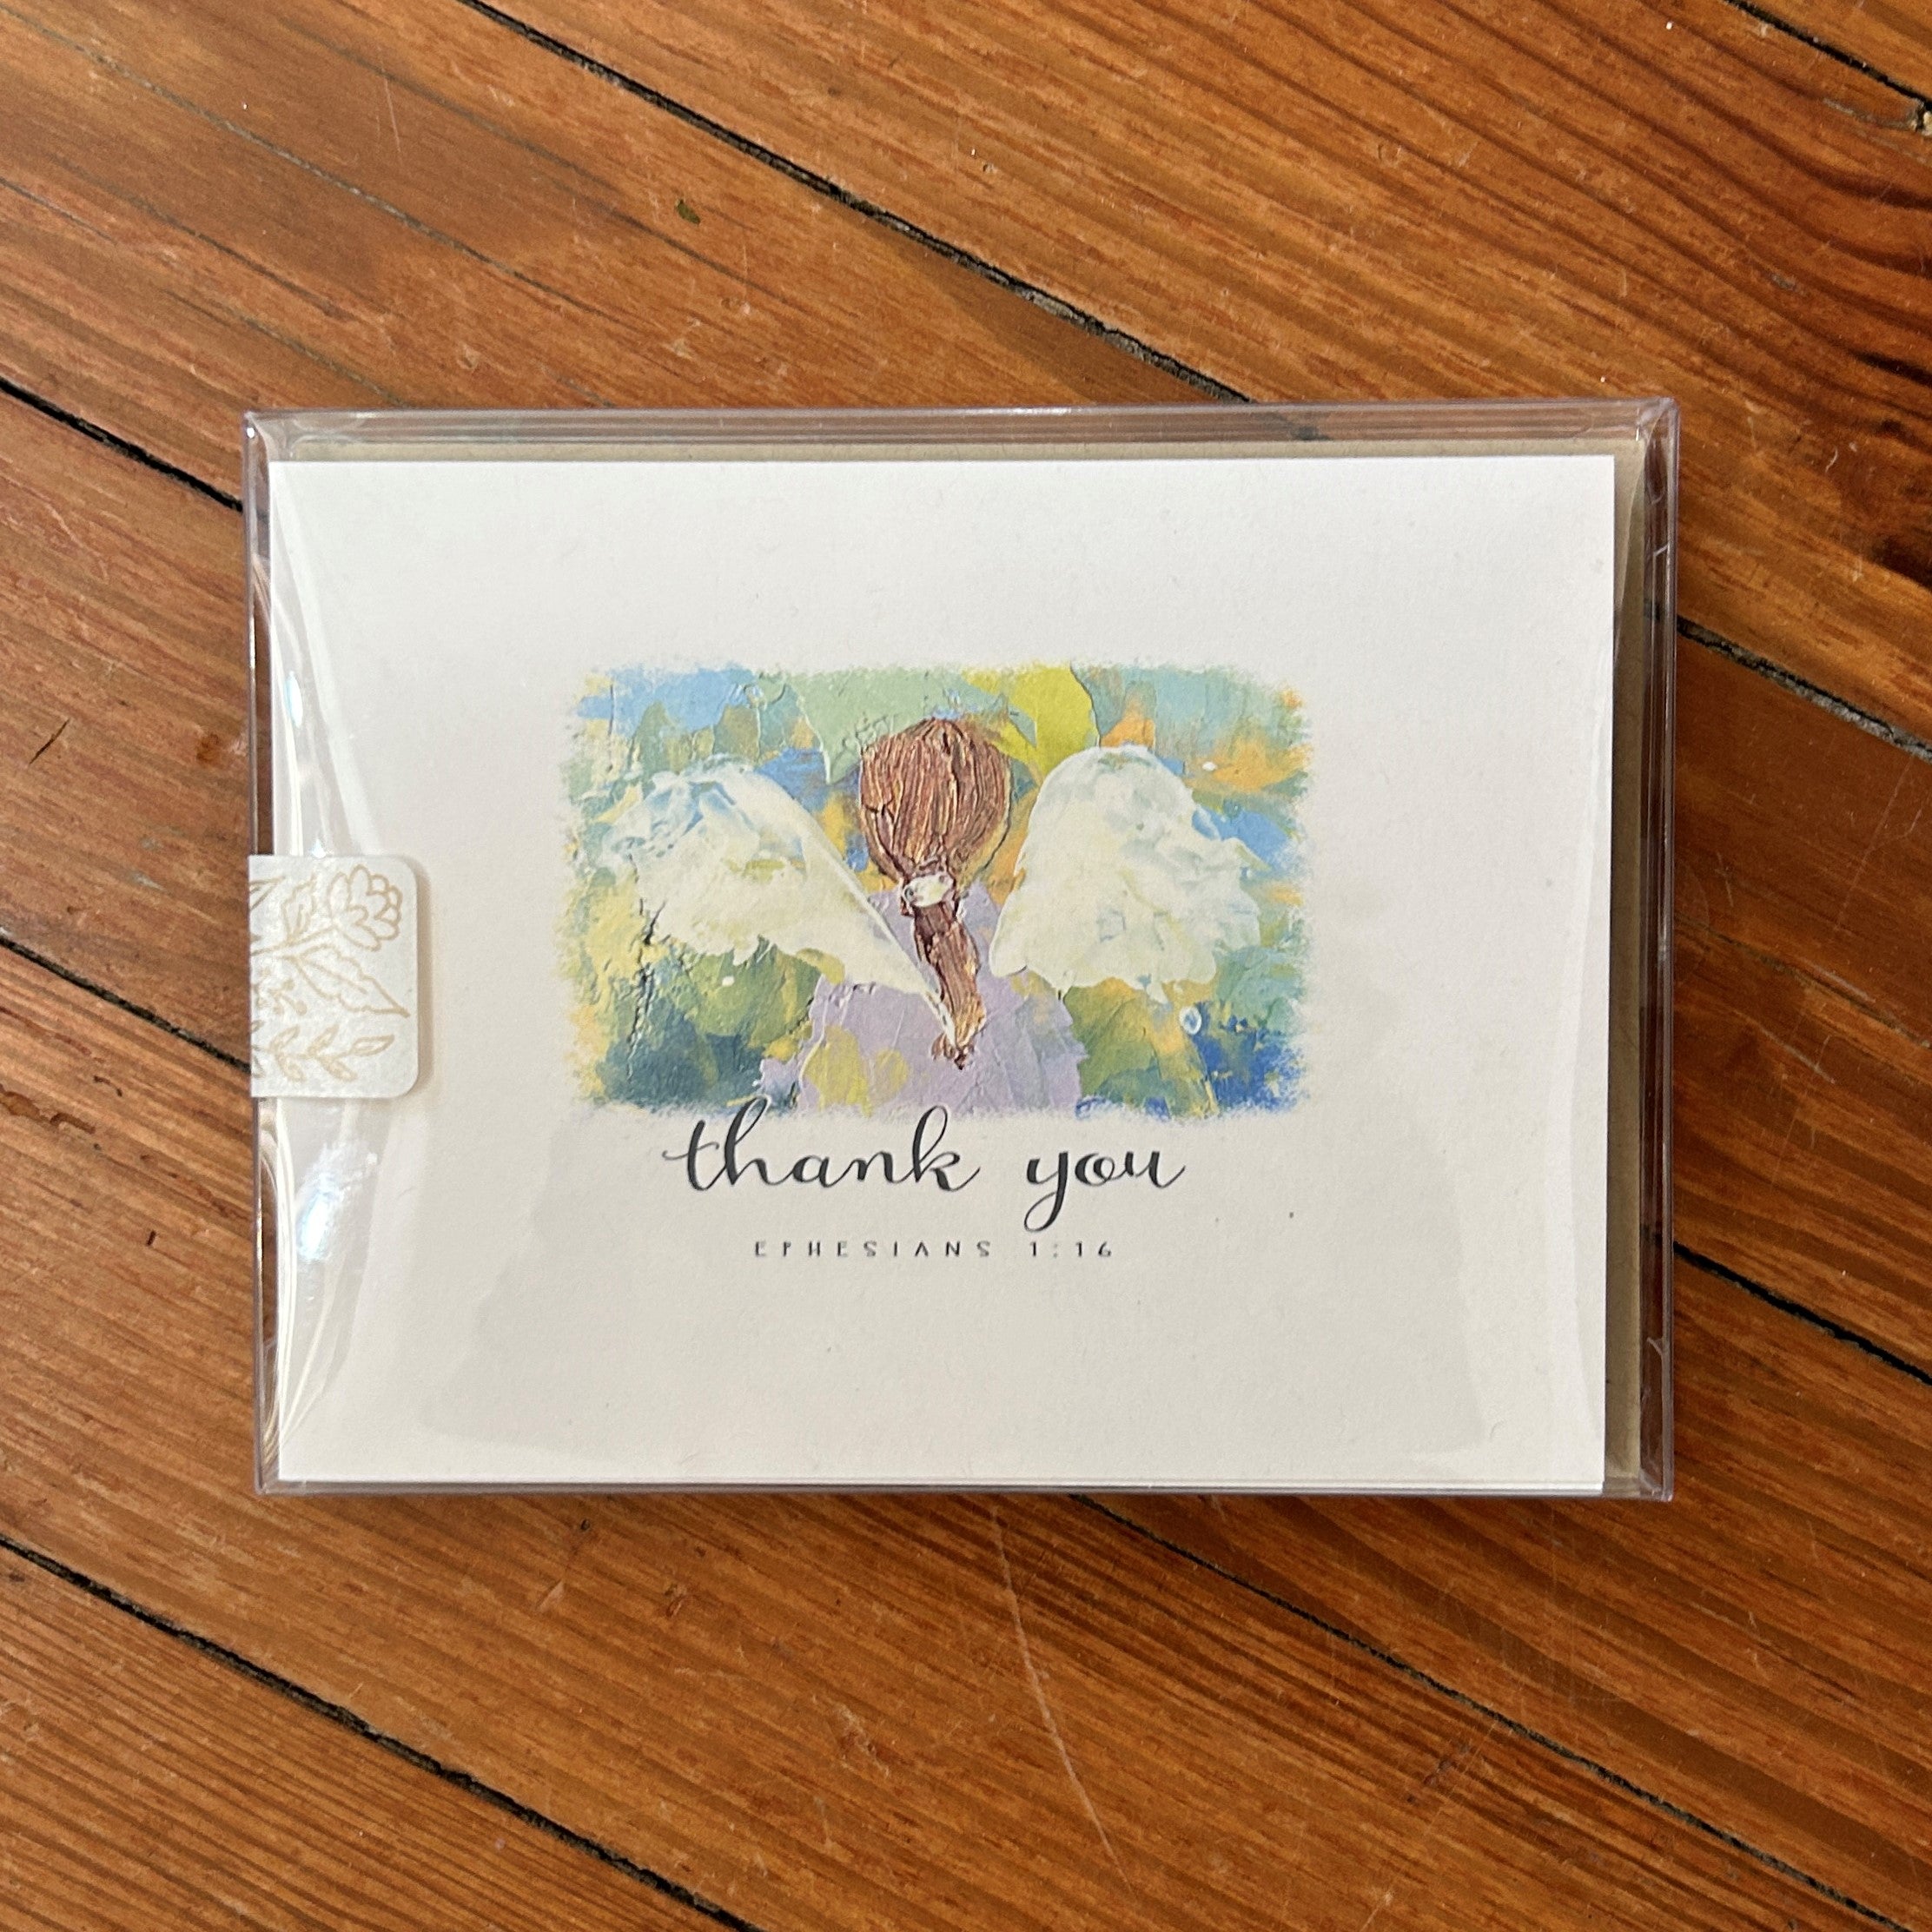 Perfect for any occasion, this Angel Thank You Cart Set (of 8) contains an A2 size card printed on recycled natural white cover stock with a recycled brown kraft envelope. Featuring a beautiful Scripture verse (Ephesians 1:16), the card is blank inside, allowing you to include a personal message. It's proudly made in the USA.